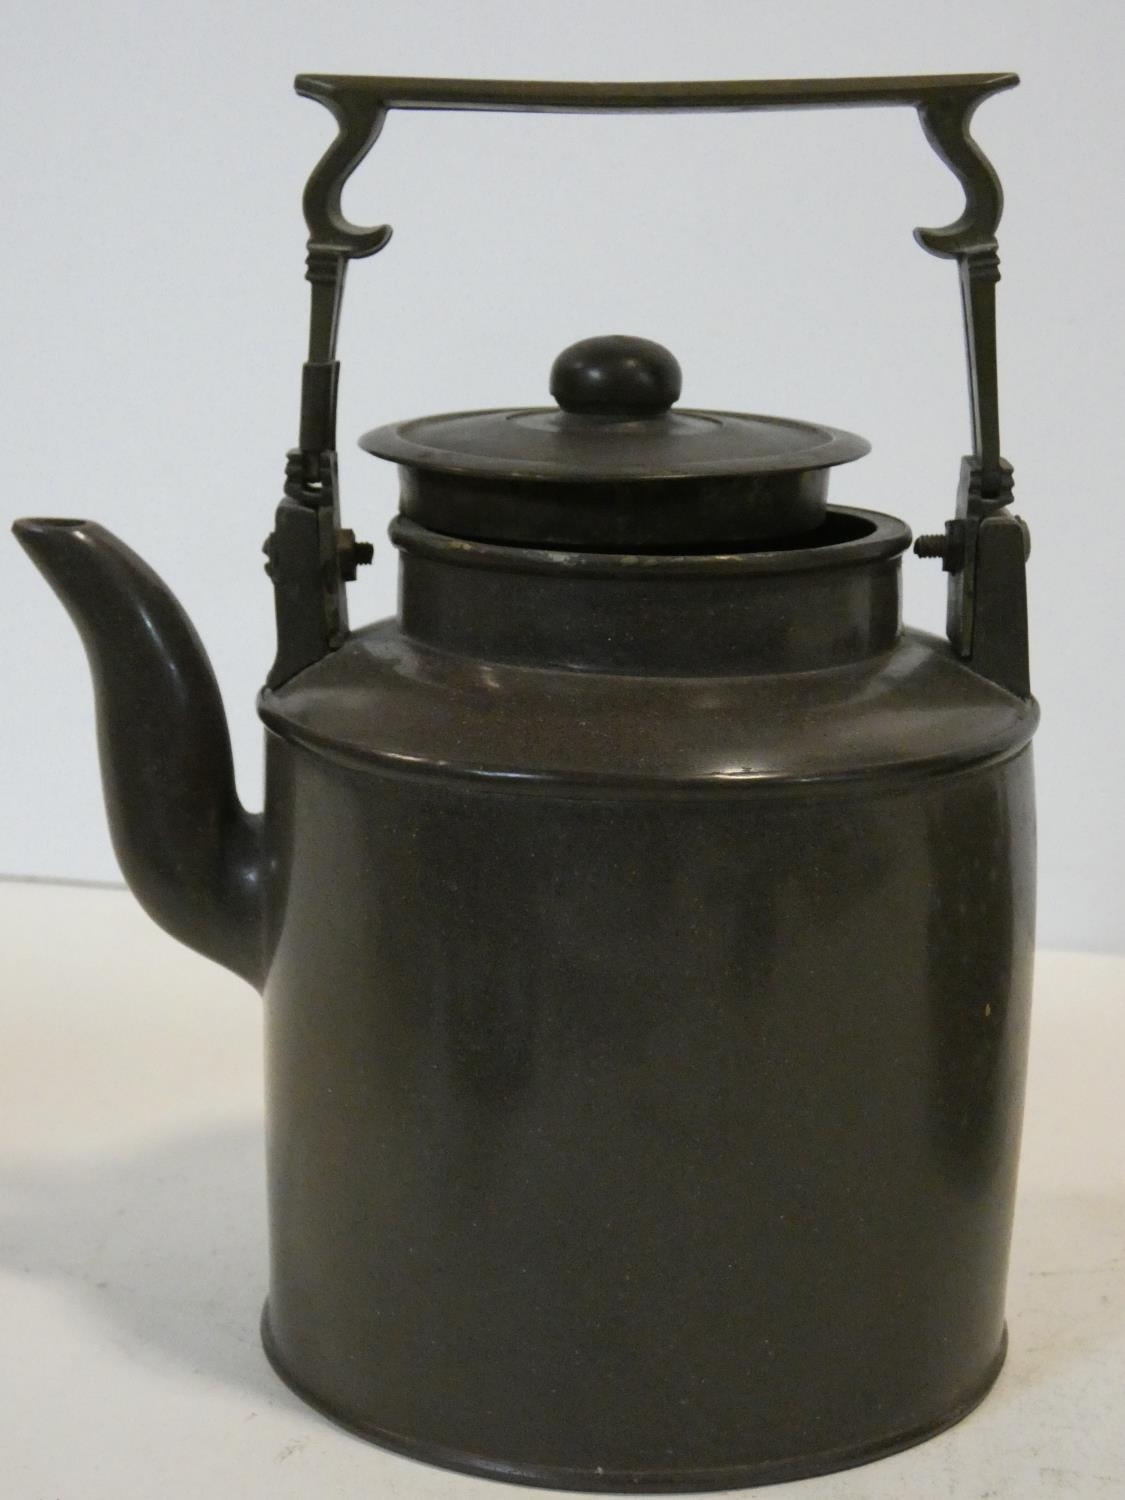 Two Chinese Yixing Pottery teapots with cast brass handles and finials and banding around the edges, - Image 3 of 11